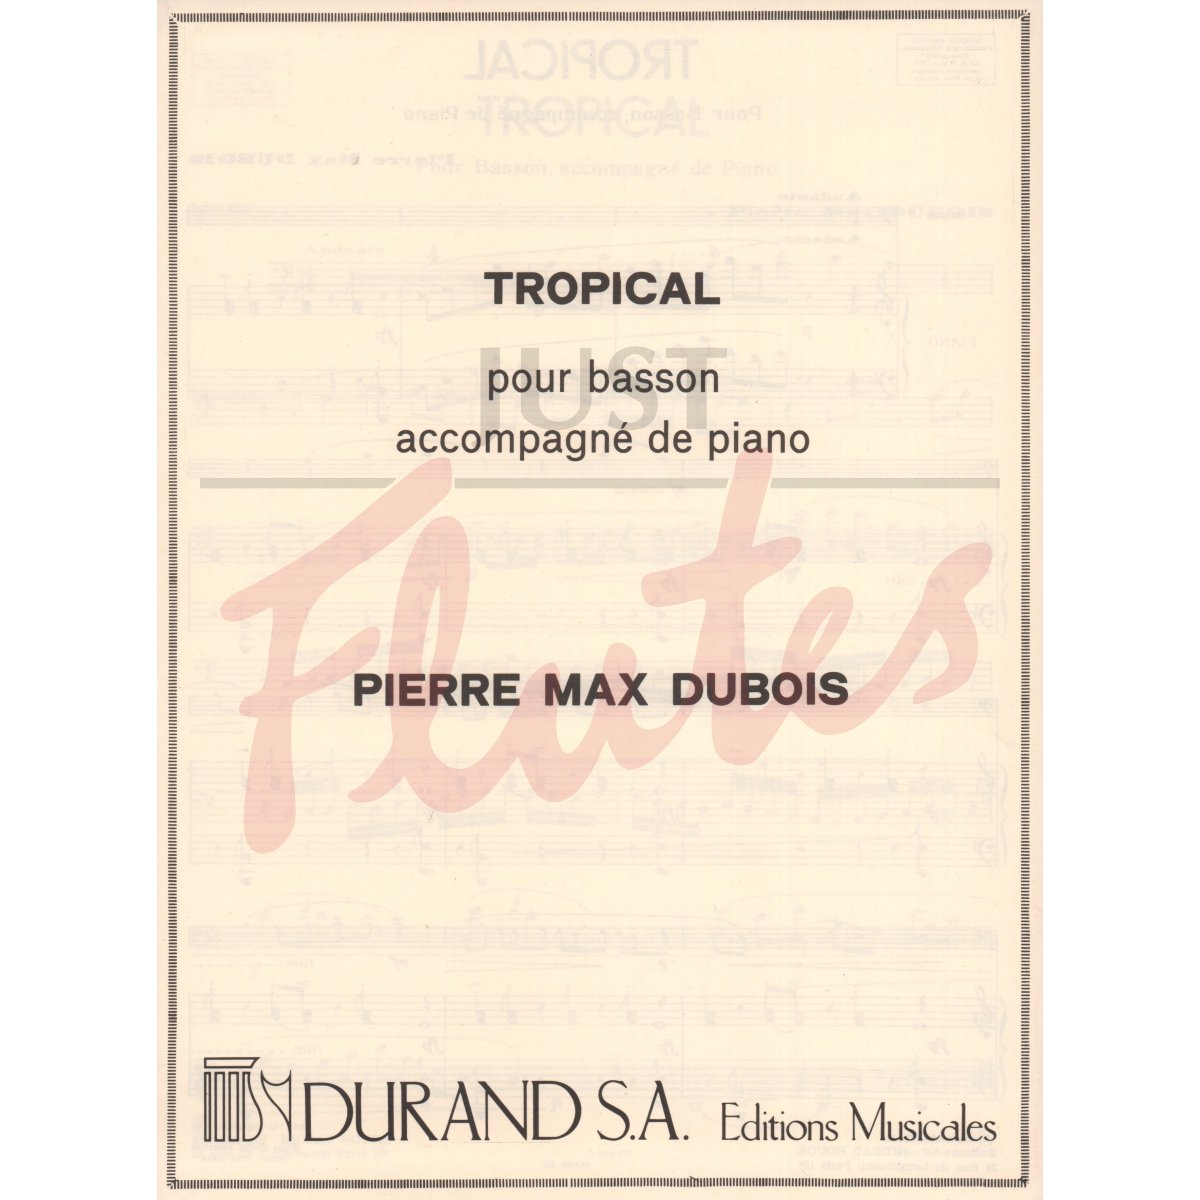 Tropical for Bassoon and Piano